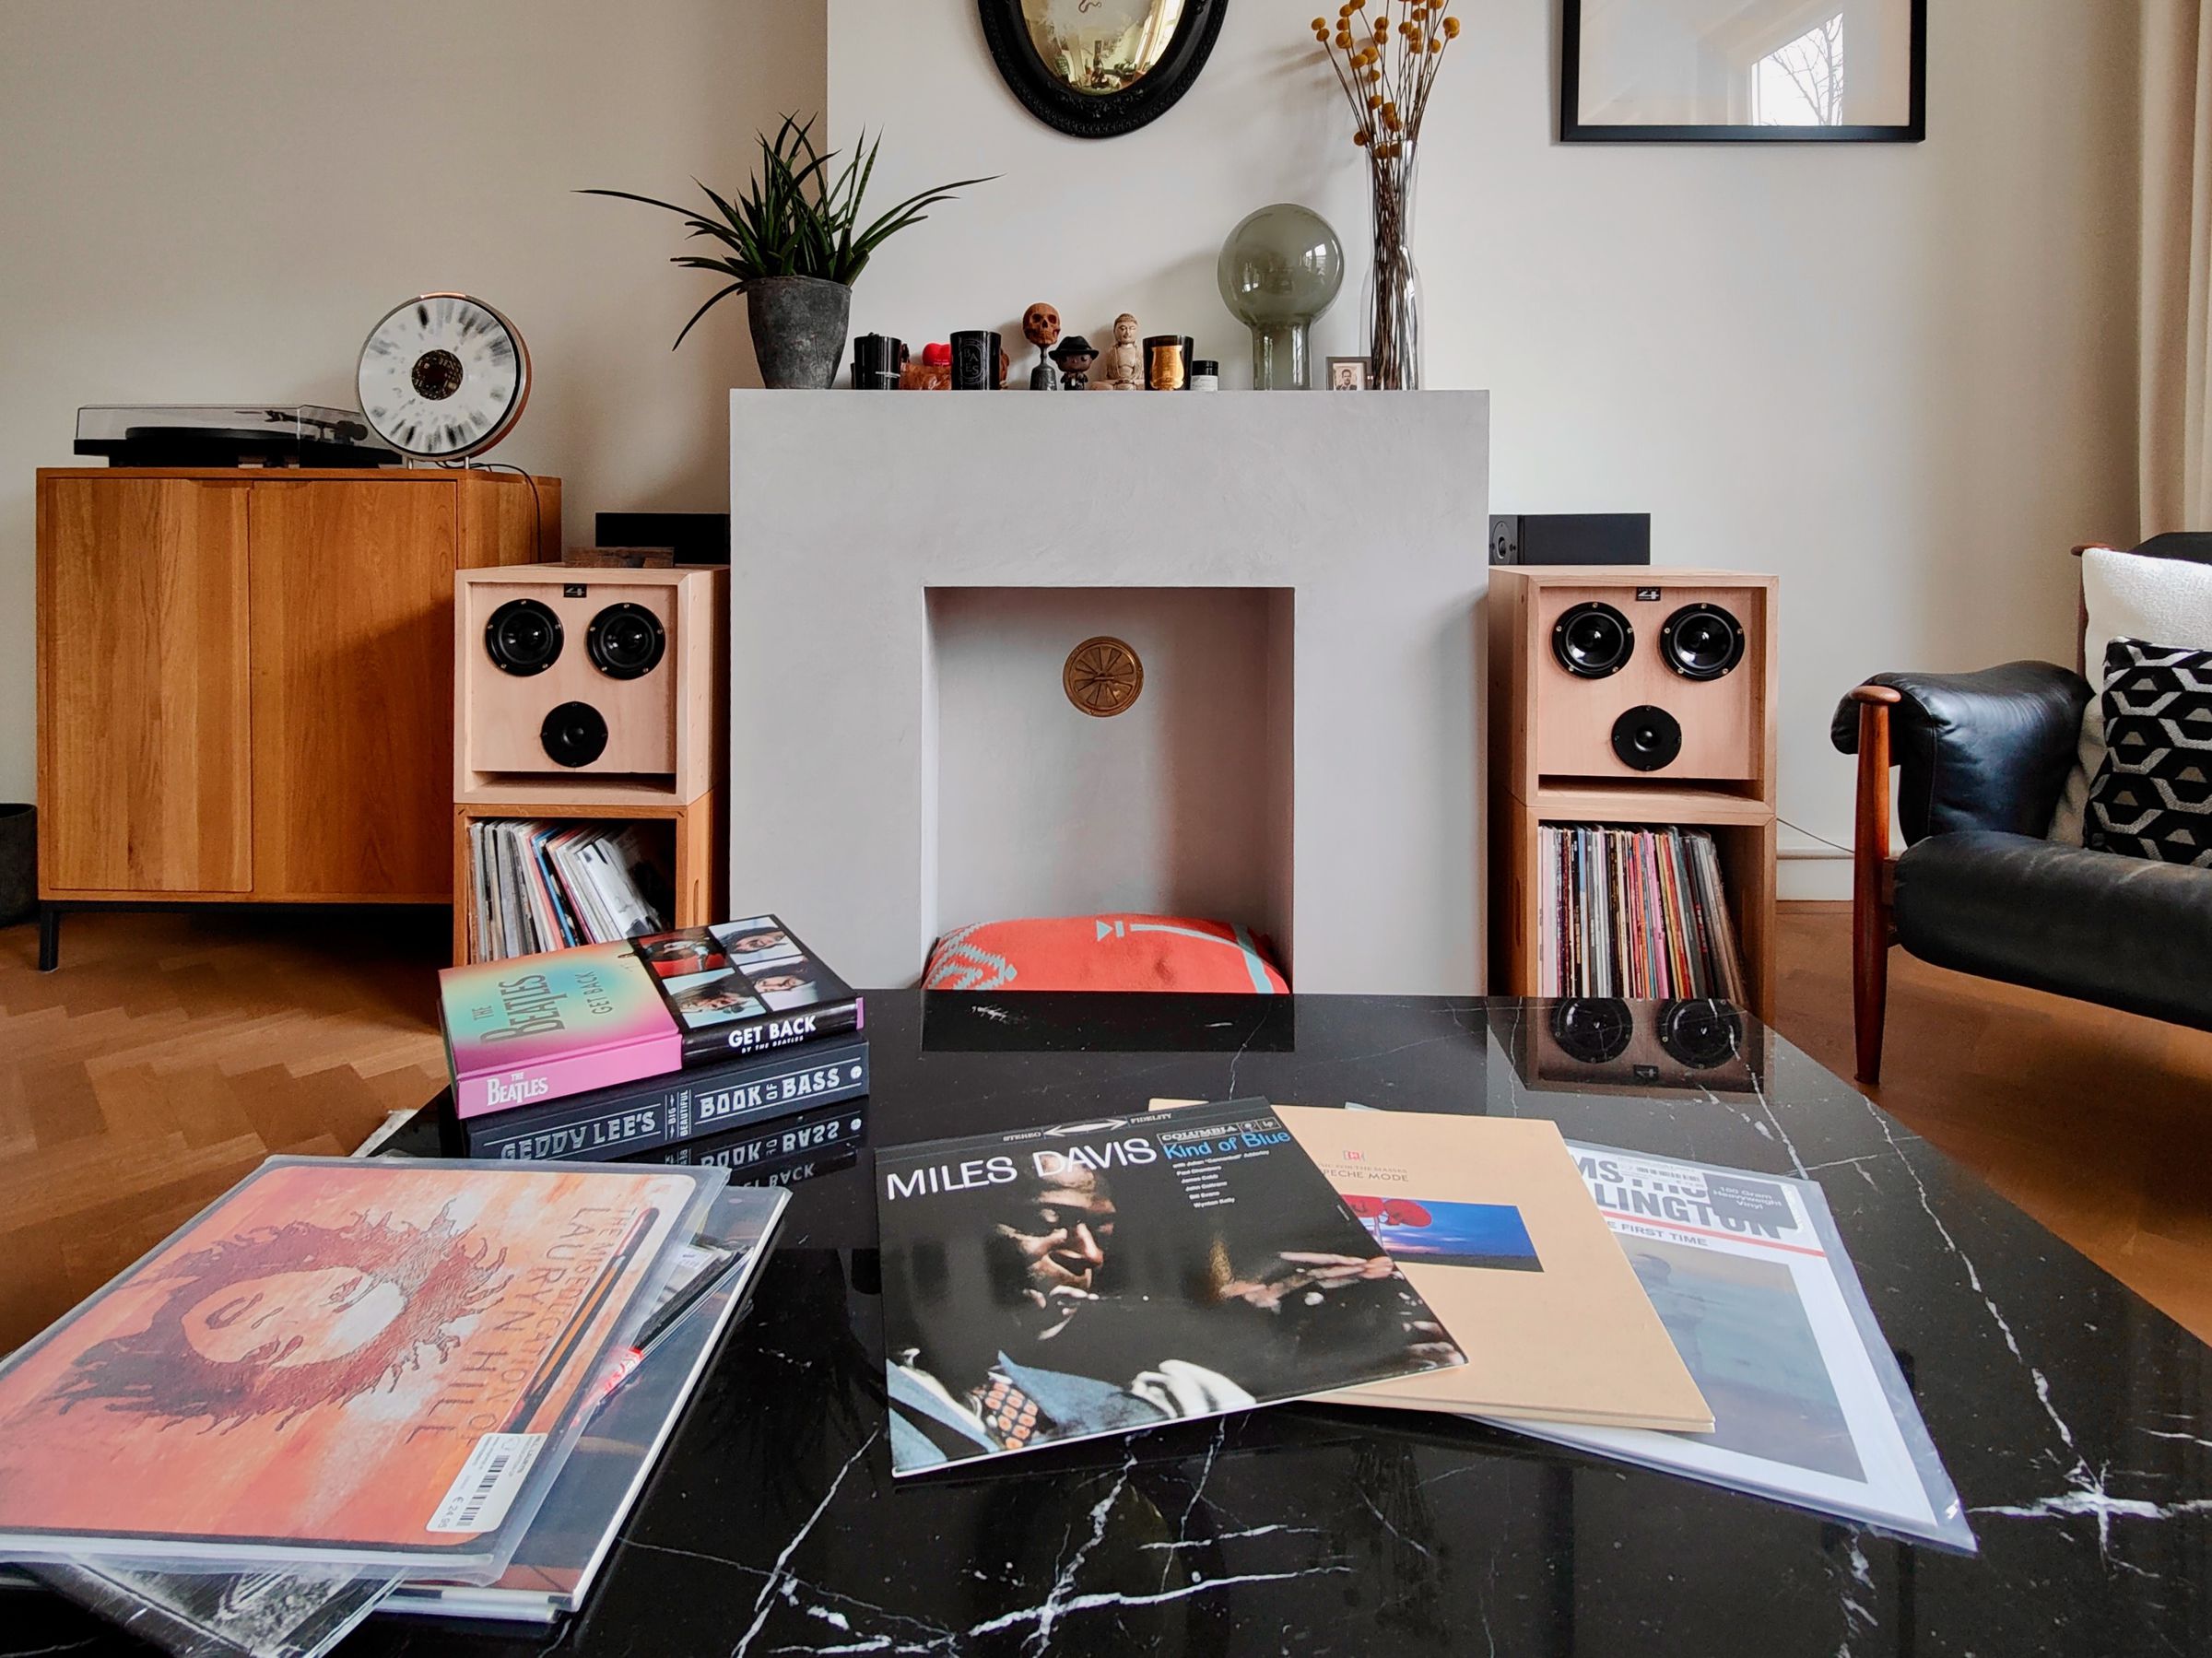 Room B: This is Doucet’s general listening room, accessible by the entire family. The Pro-Ject turntable is visible next to the Wheel 2, but it’s album isn’t.